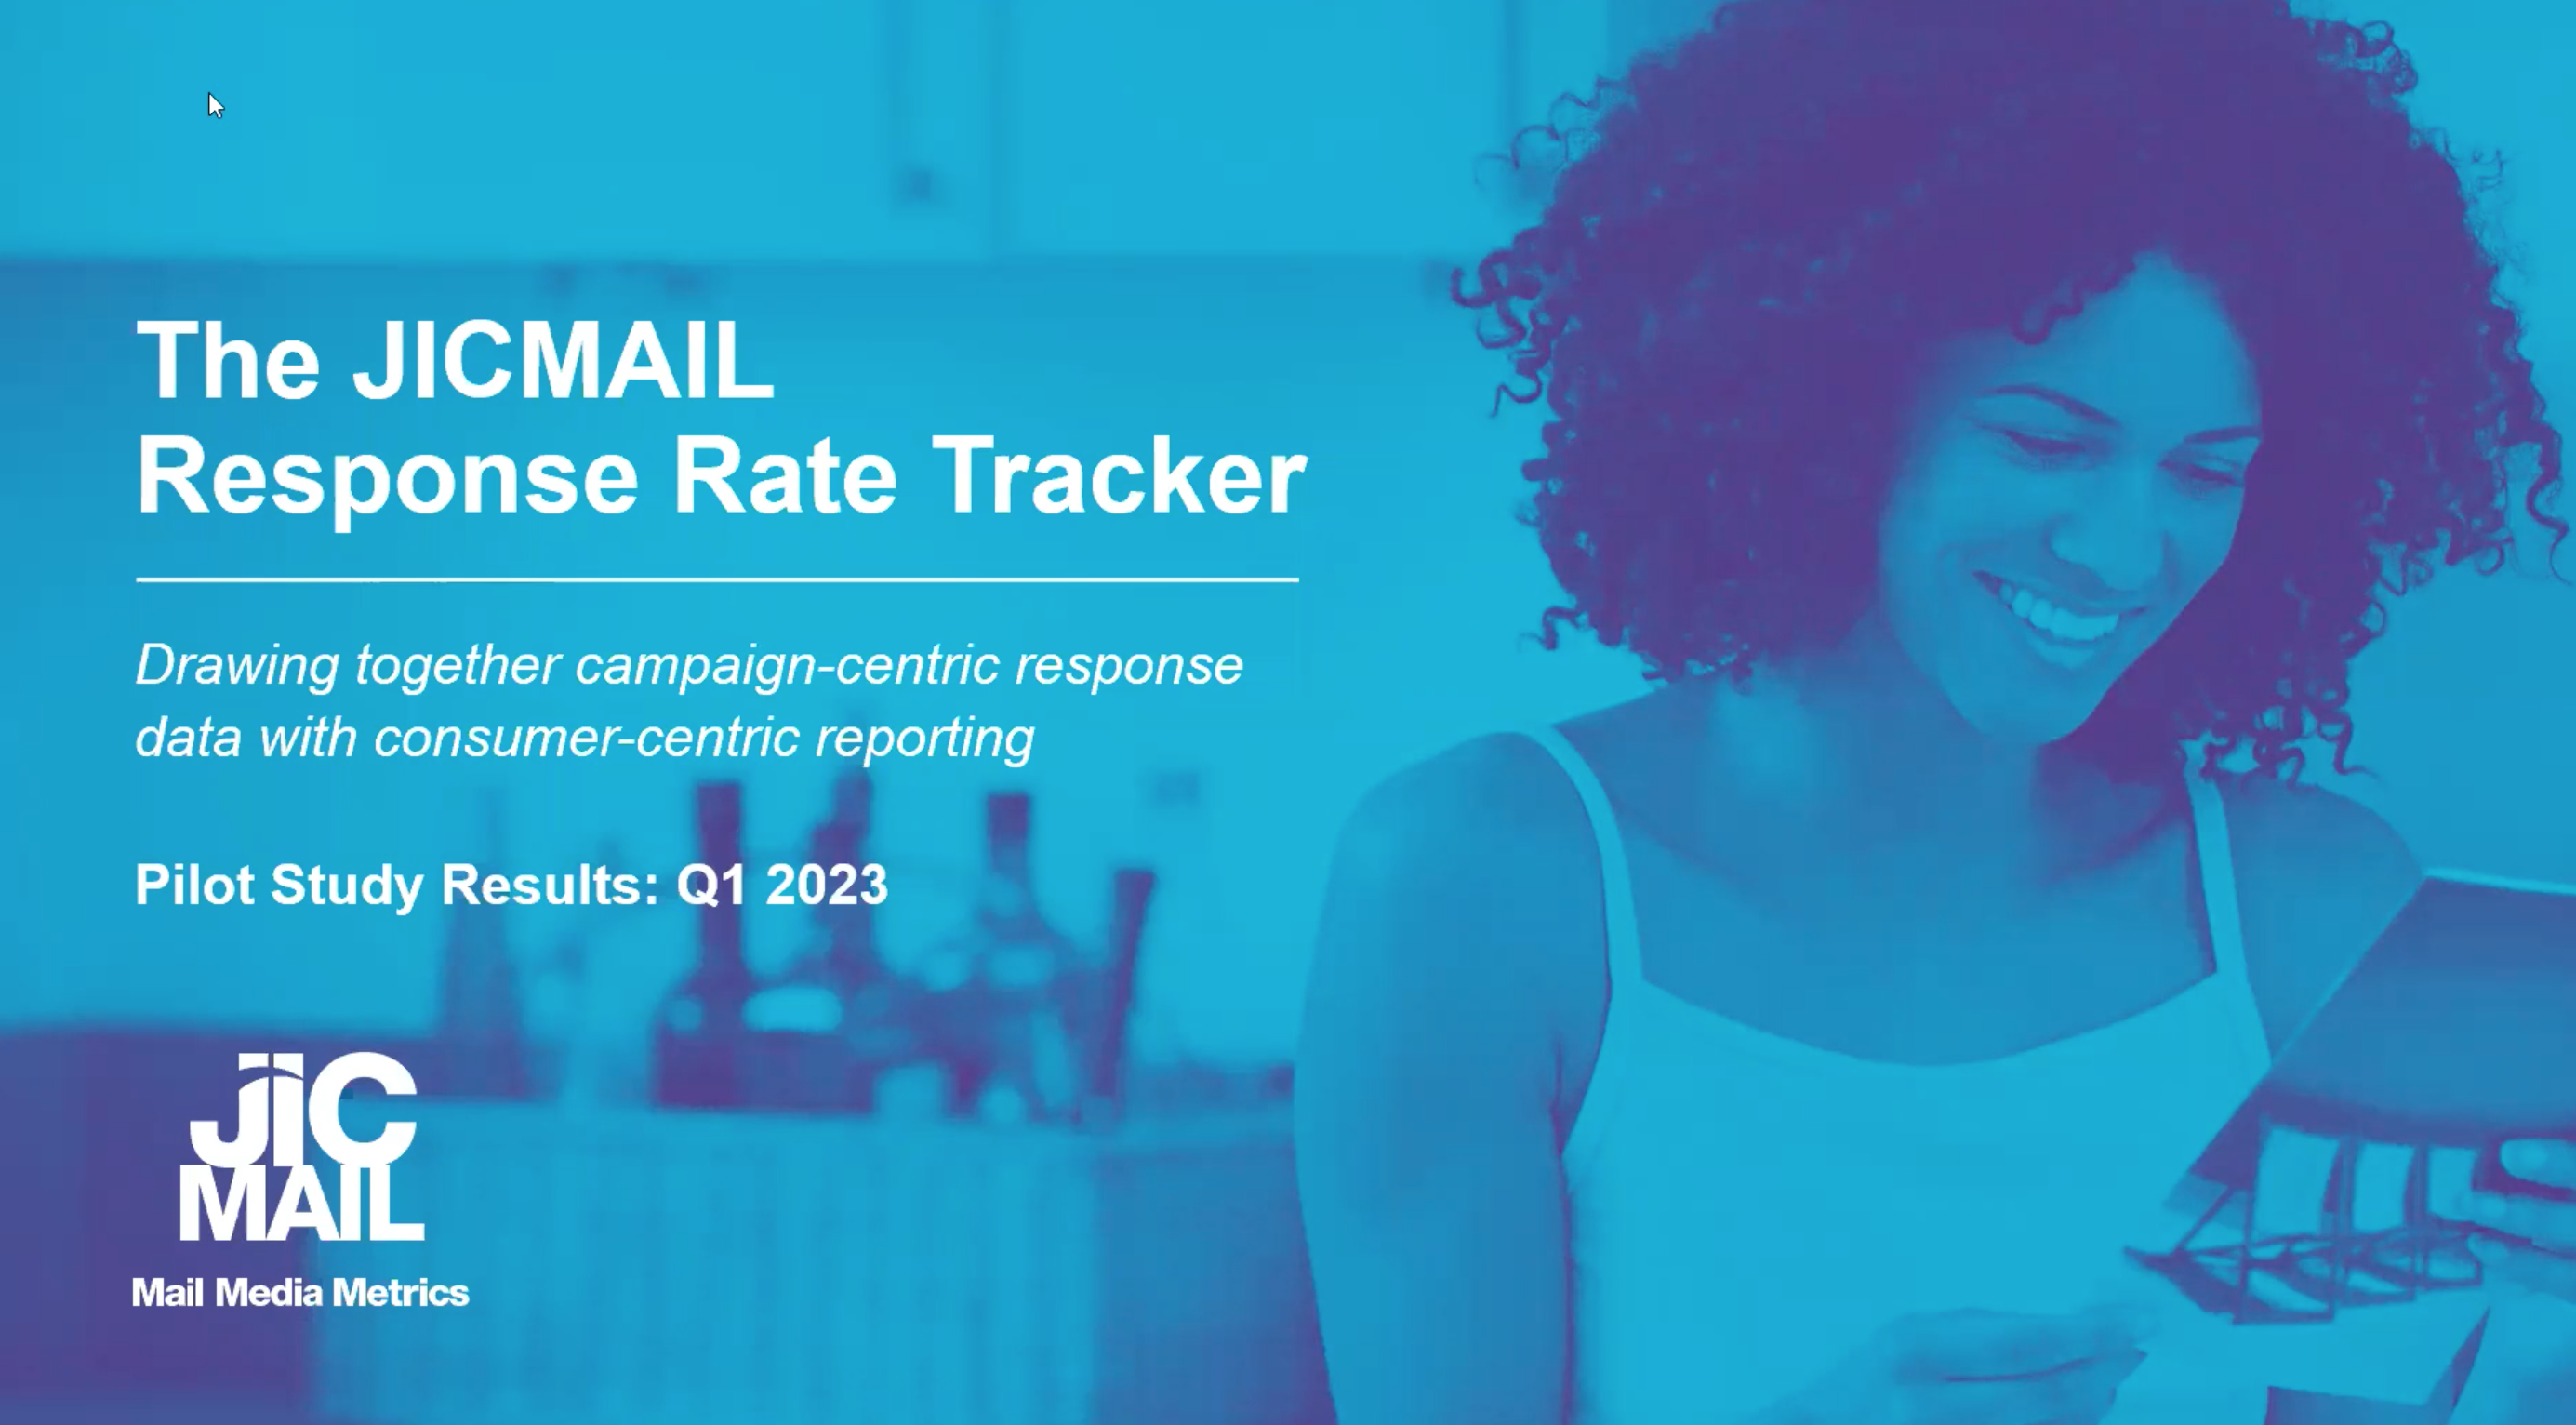 JICMAIL launches new Response Rate Tracker 